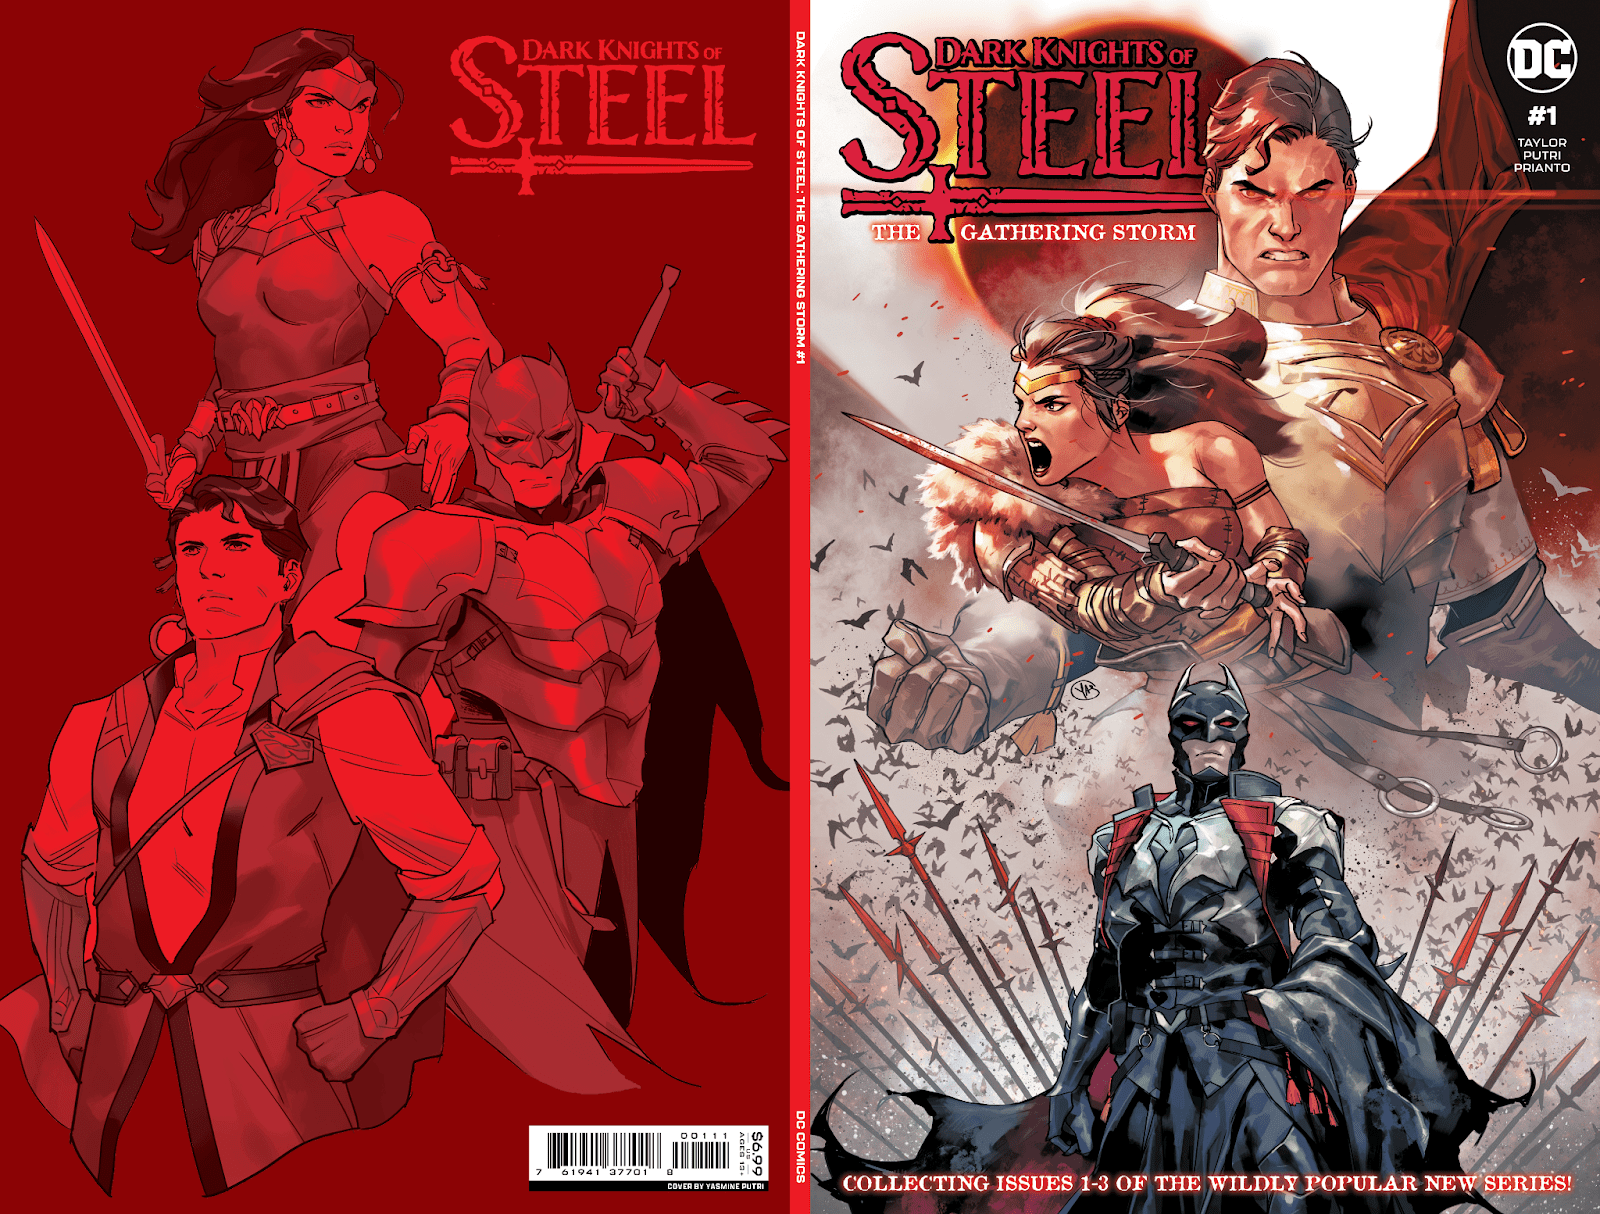 'Dark Knights of Steel: The Gathering Storm' reprints first three issues